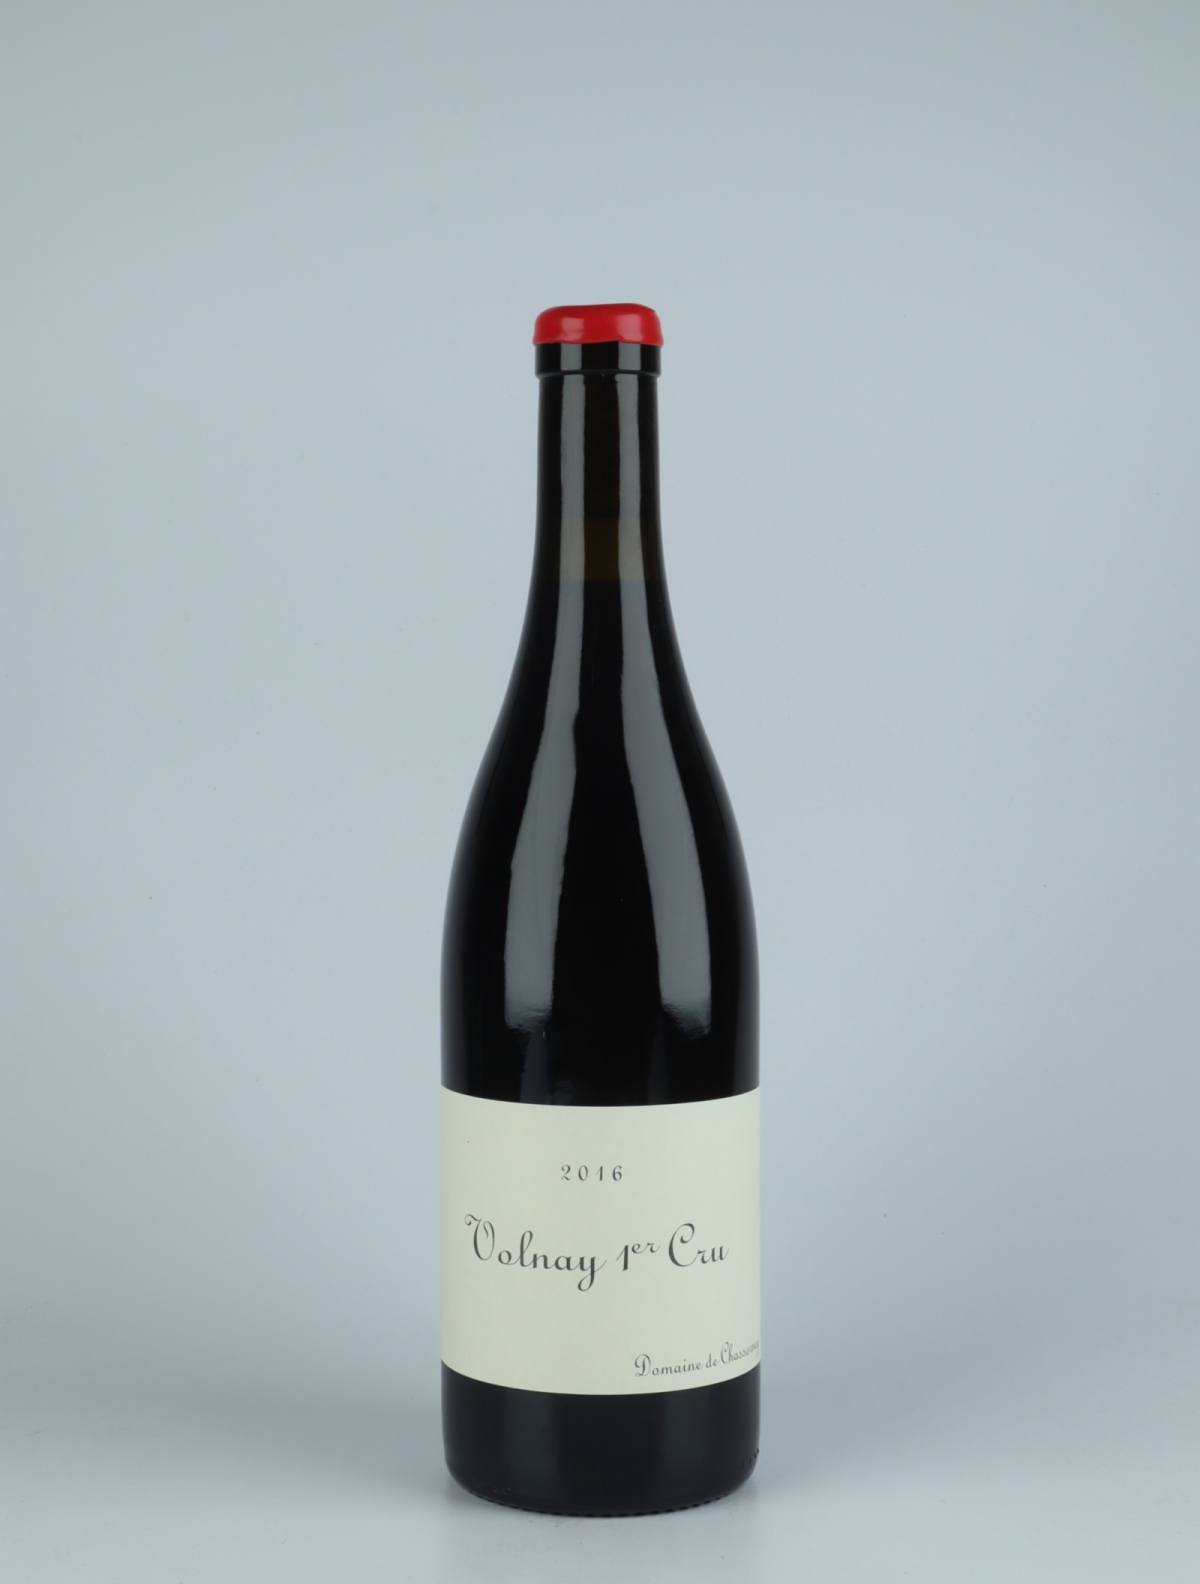 A bottle 2016 Volnay 1. Cru Red wine from Domaine de Chassorney, Burgundy in France